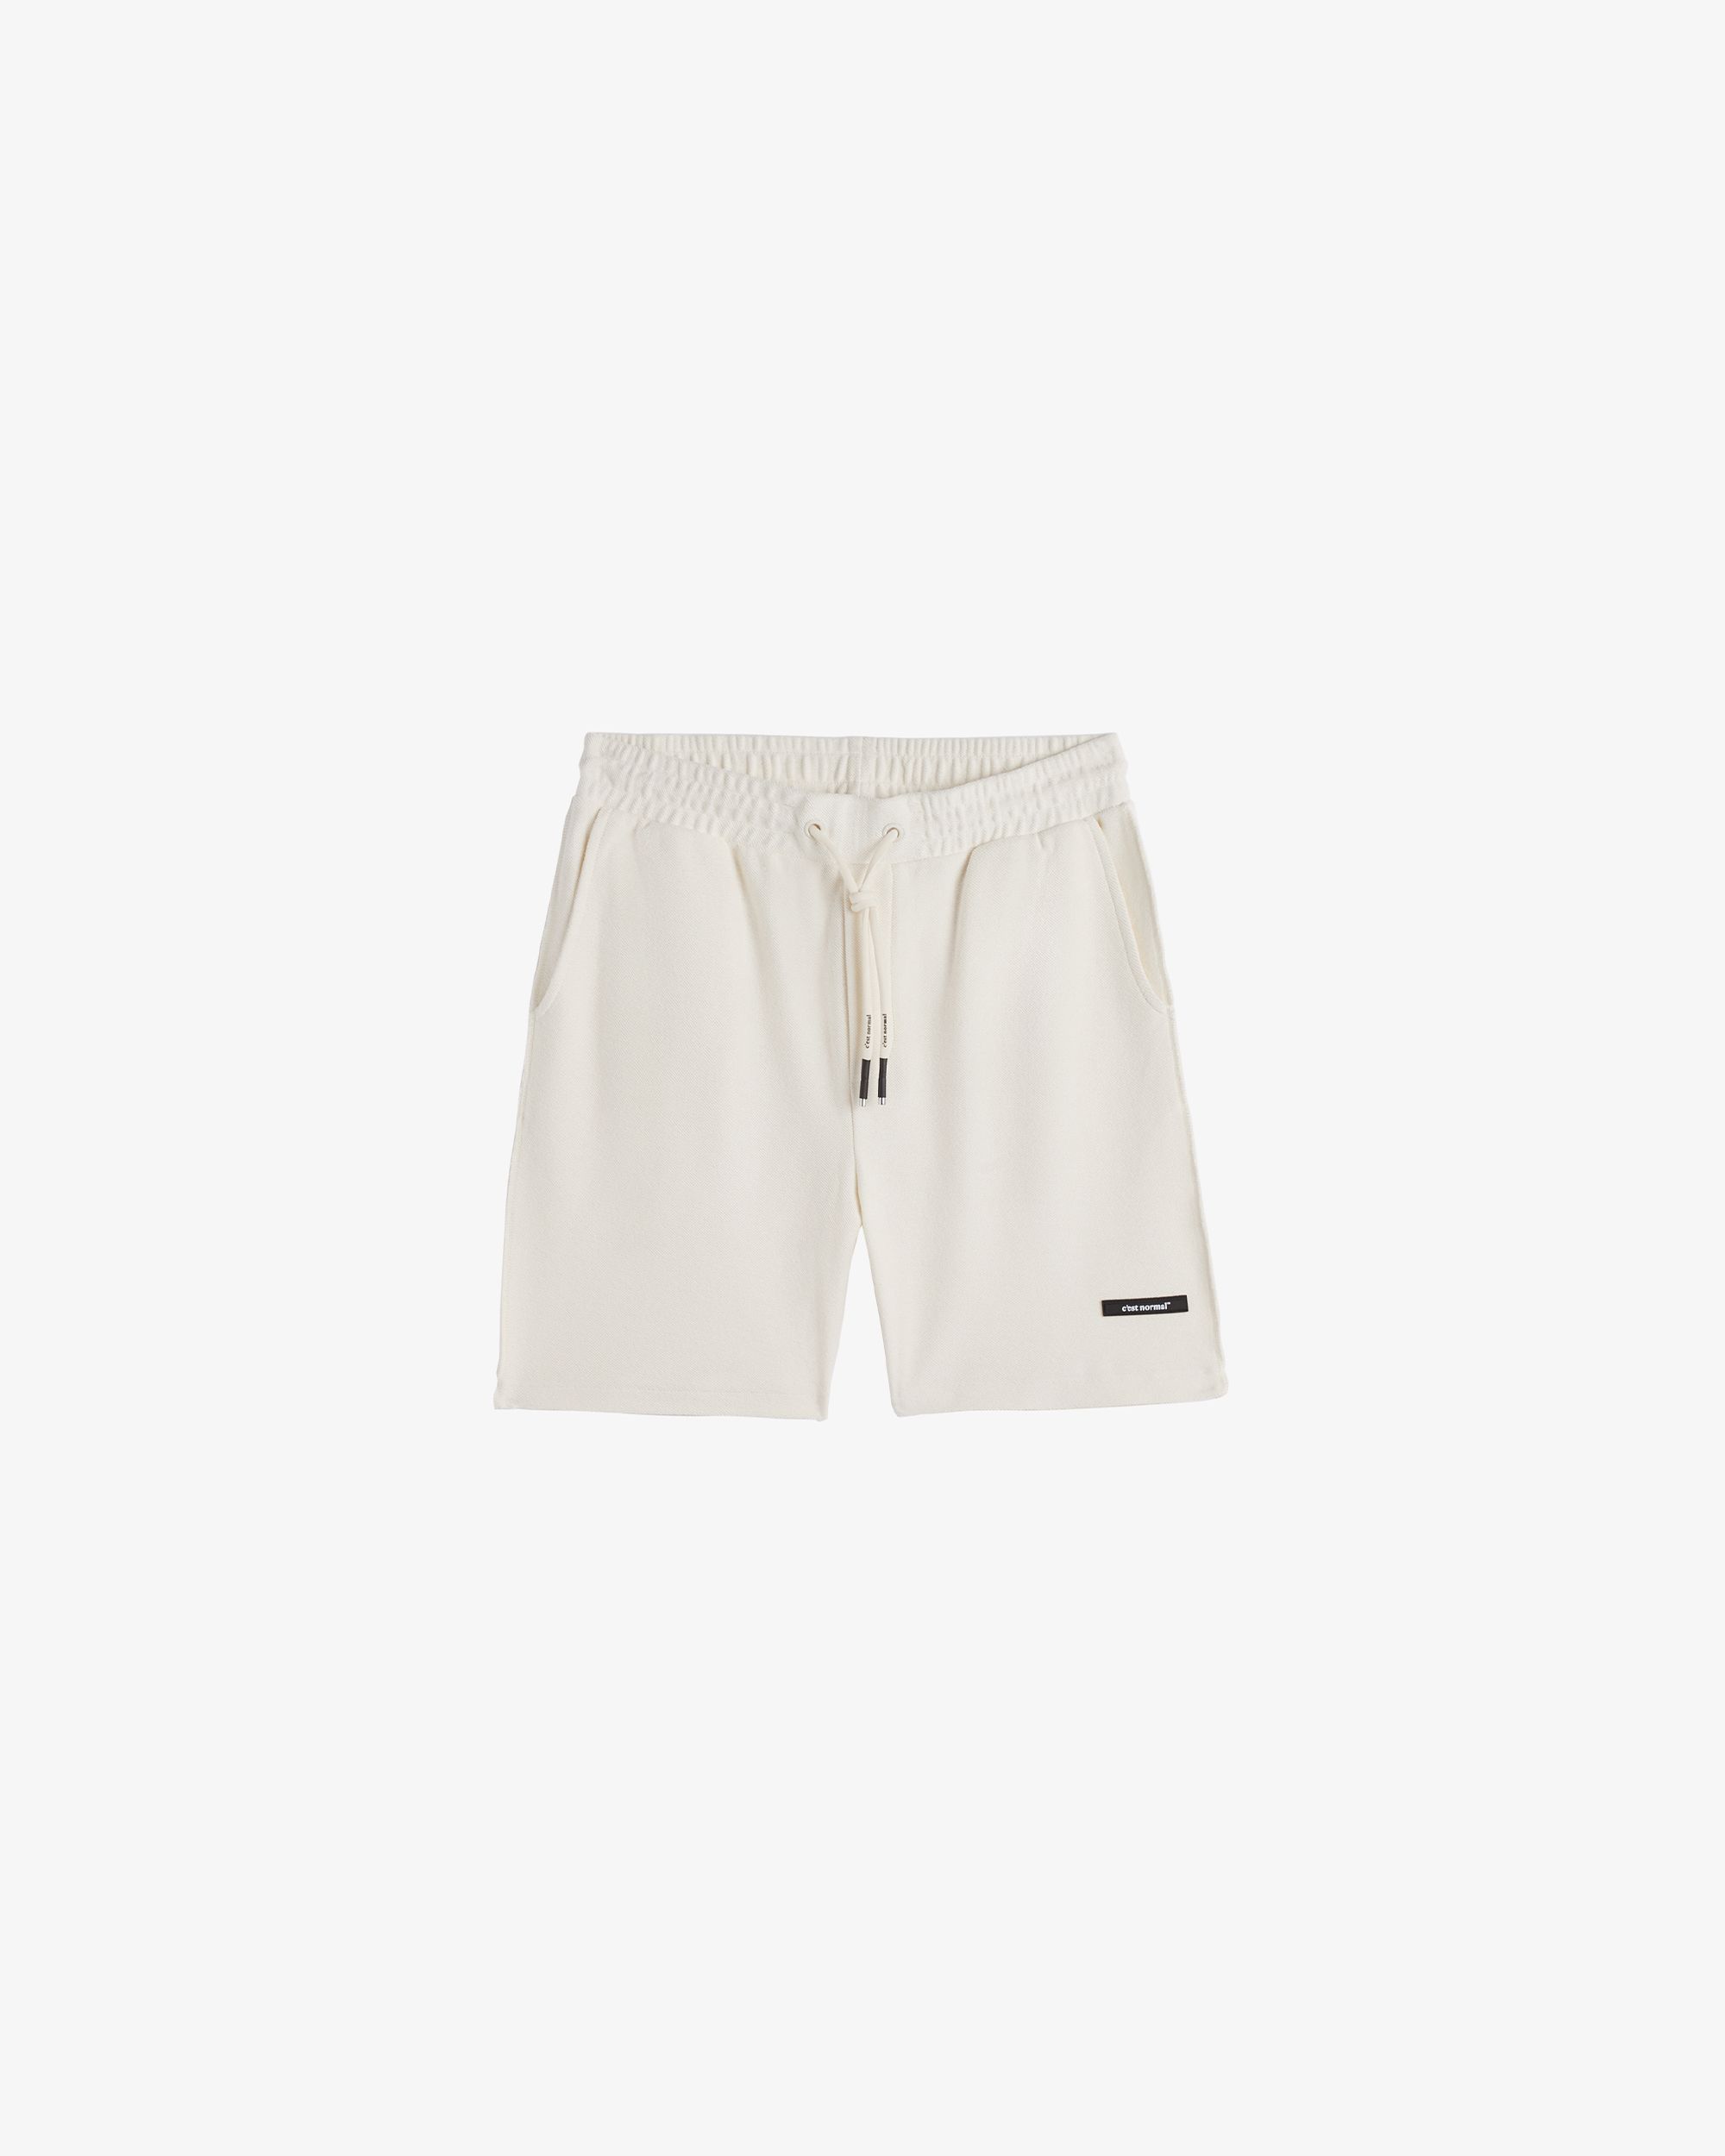 The Inside-Out Shorts | c'est normal - Around here.